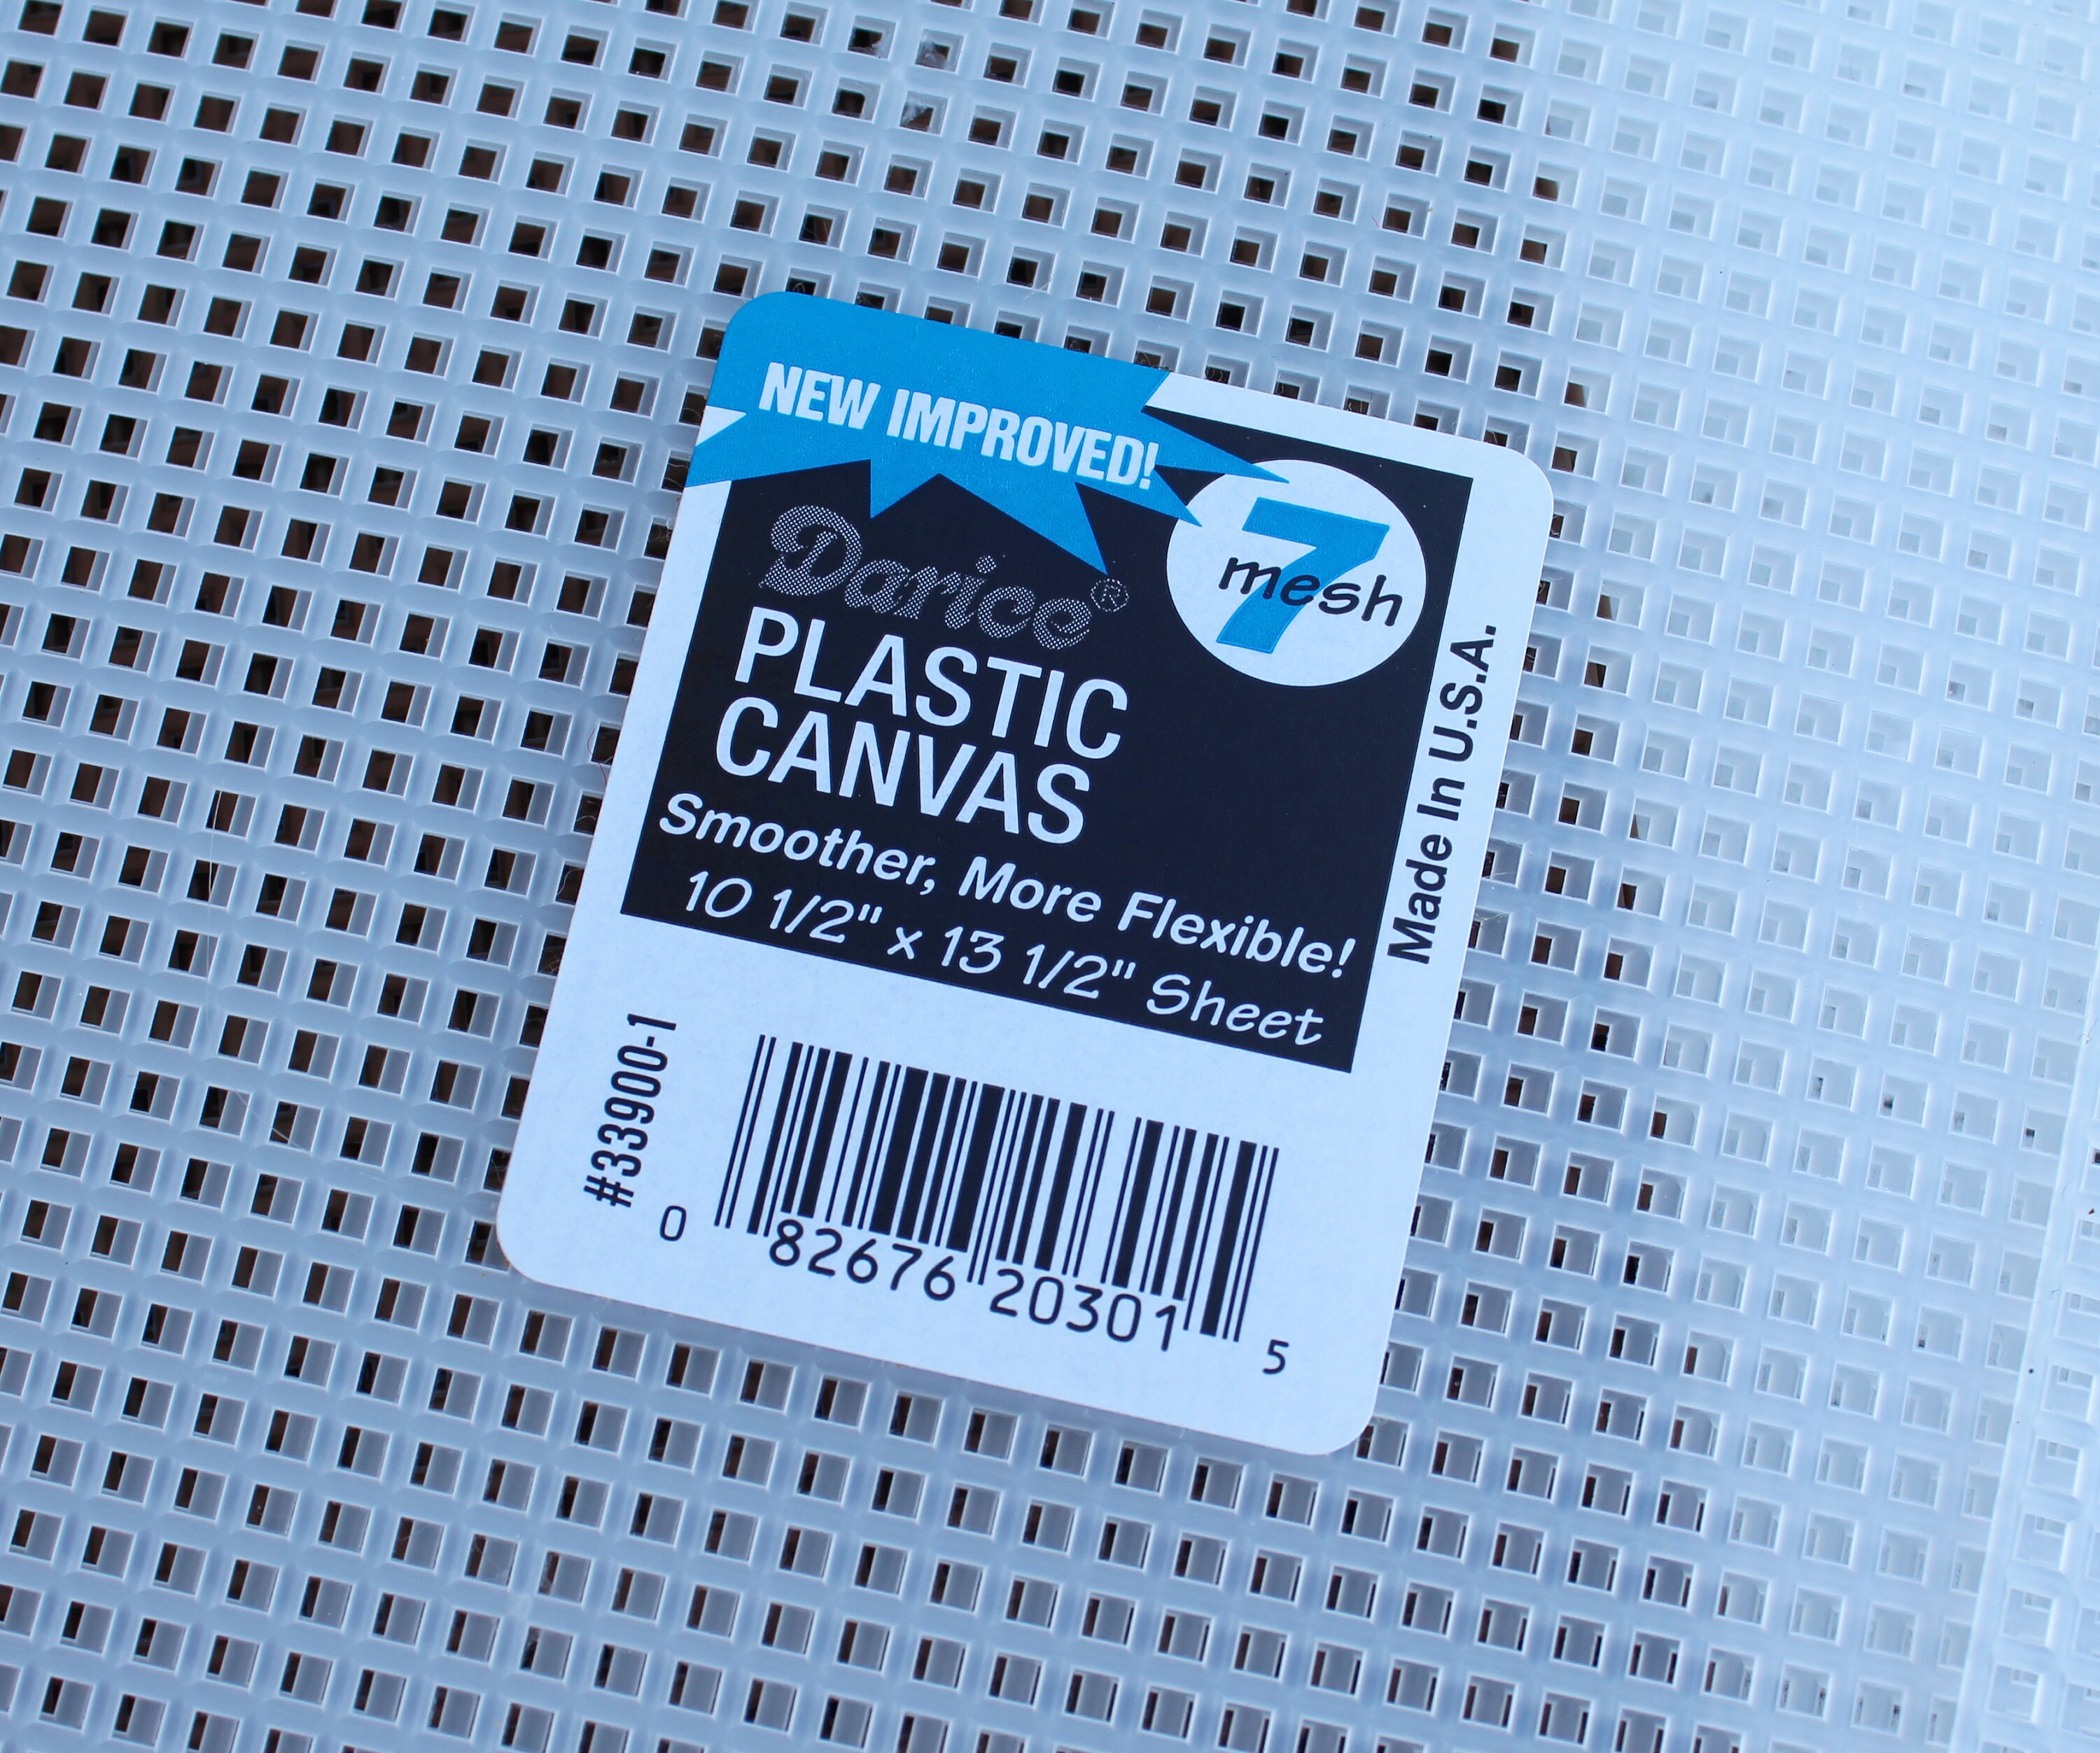 Plastic Canvas 13 1/2 X 10 1/2 Sheet Many Colors One Sheet (7 holes to  inch)